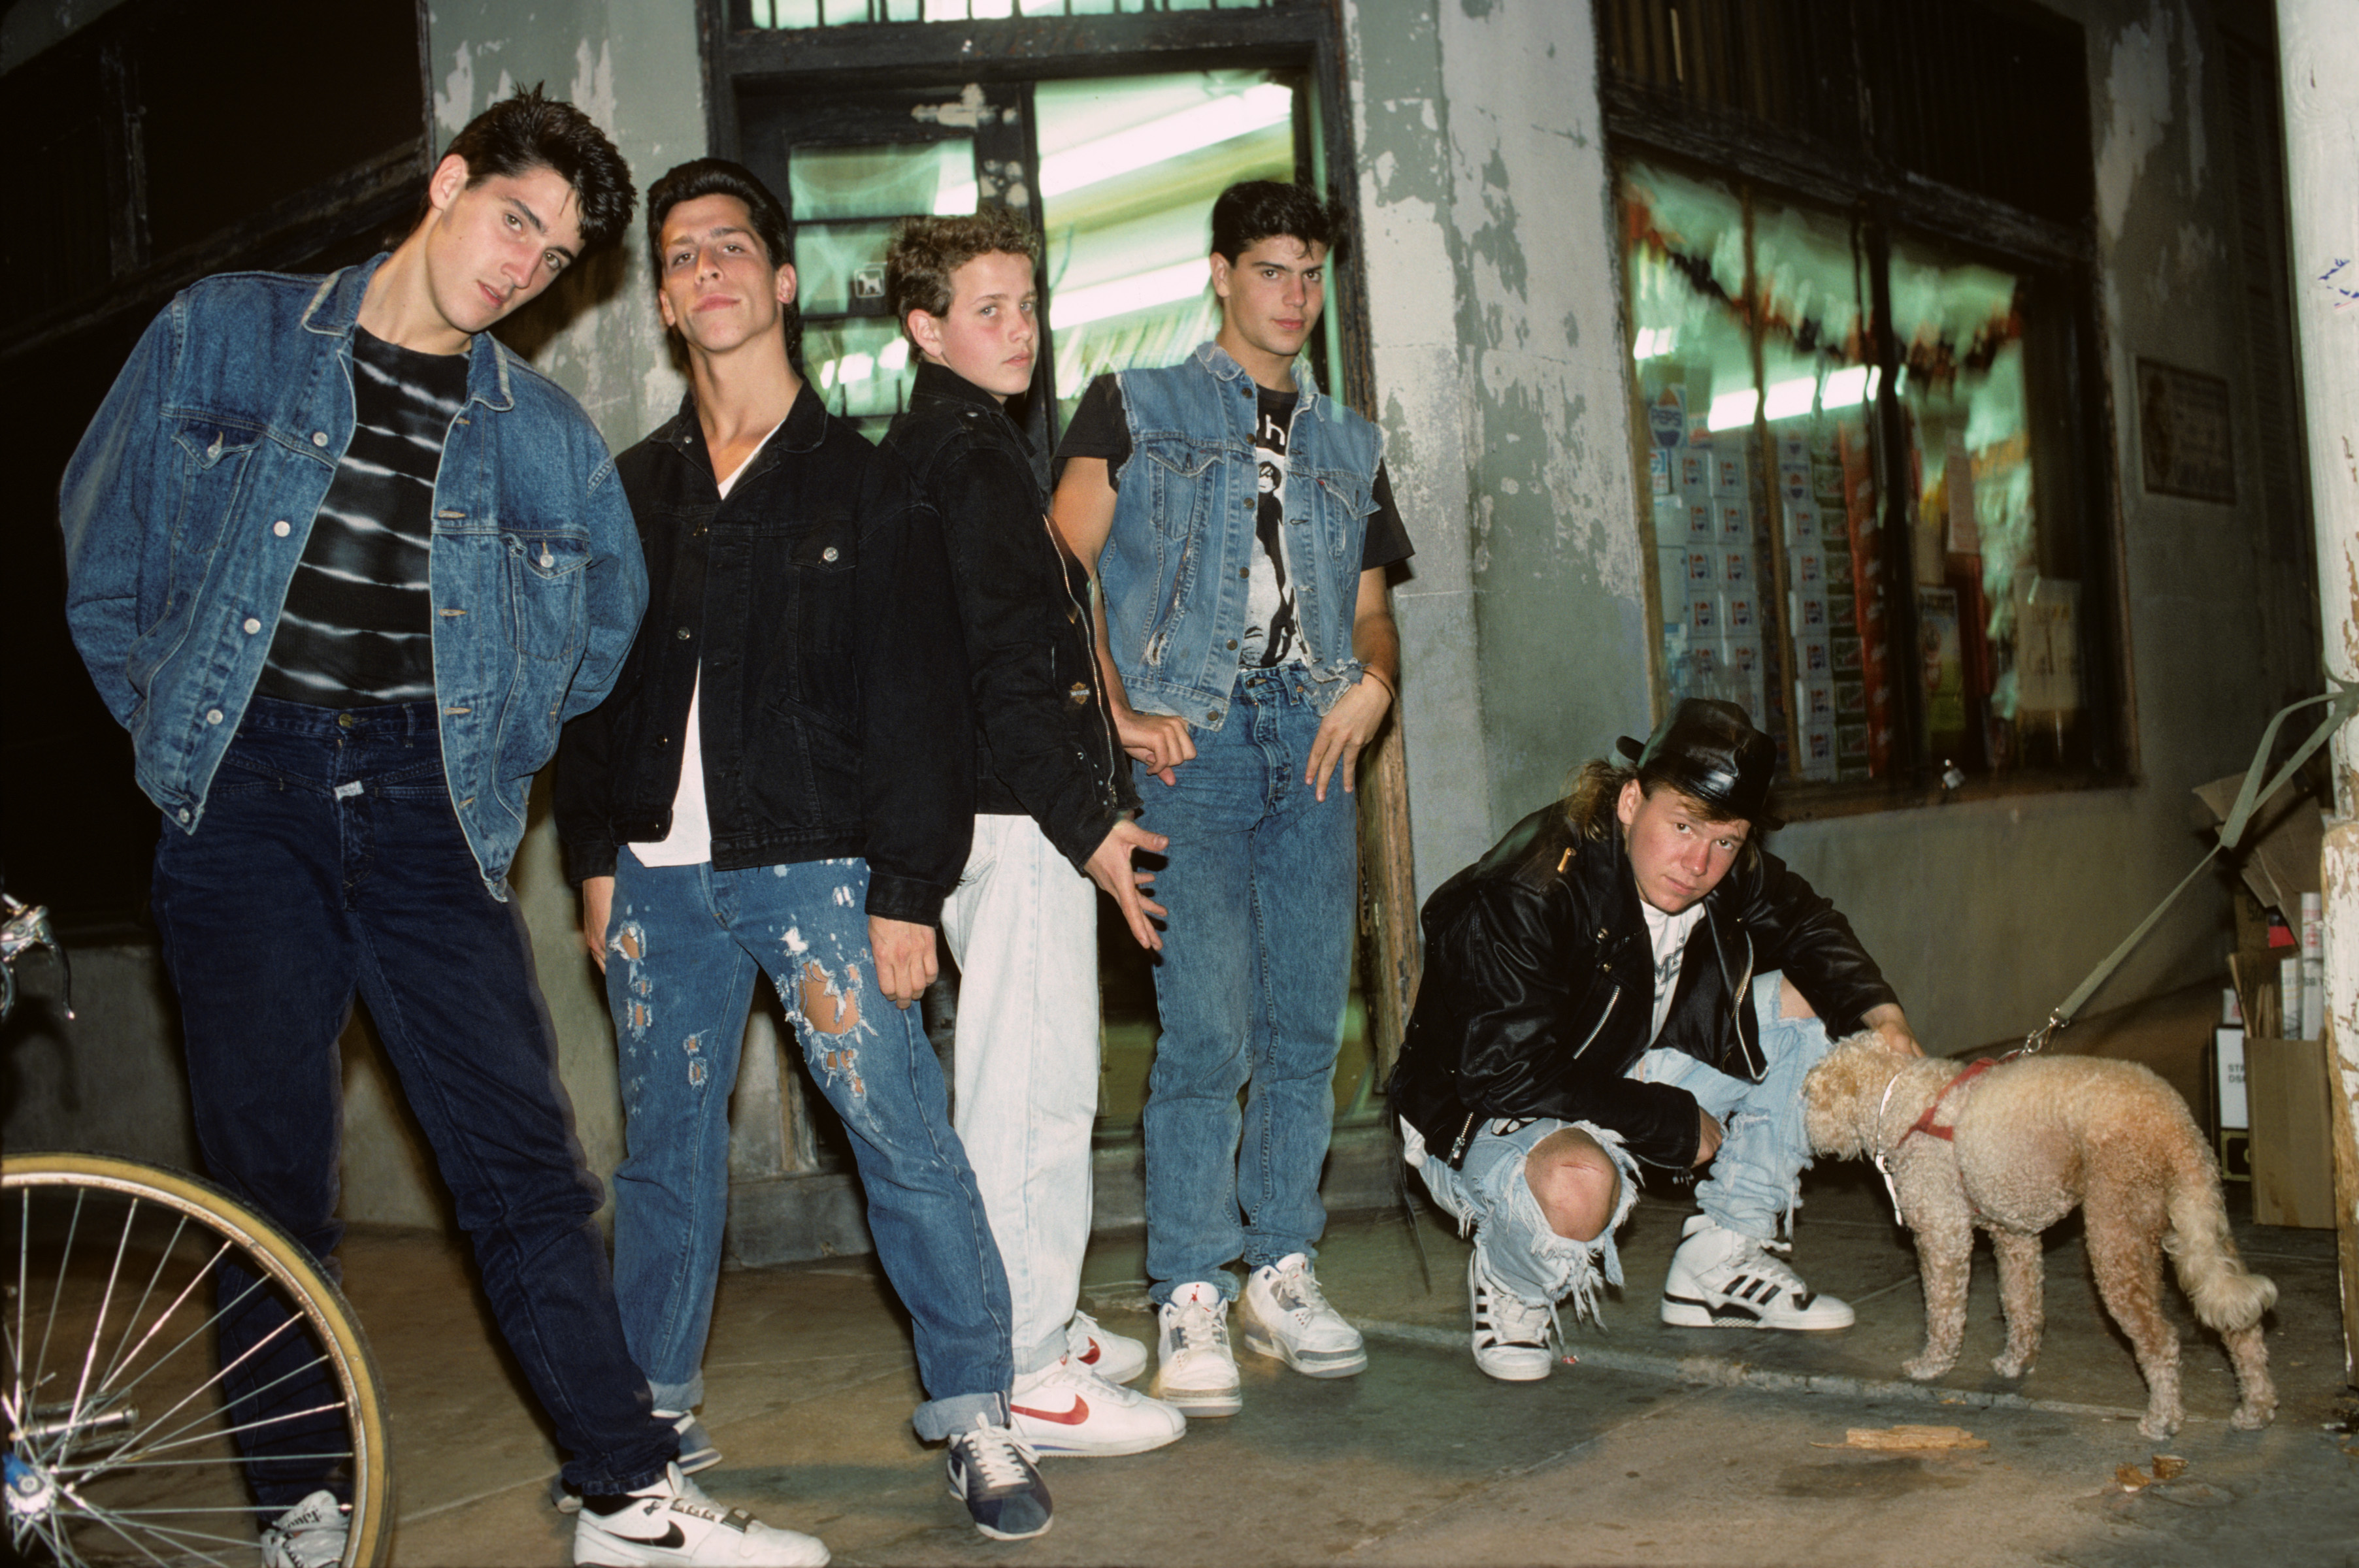 Photo of NEW KIDS ON THE BLOCK and Jordan KNIGHT and Joey McINTYRE and Danny WOOD and Donnie WAHLBERG and Jonathan KNIGHT